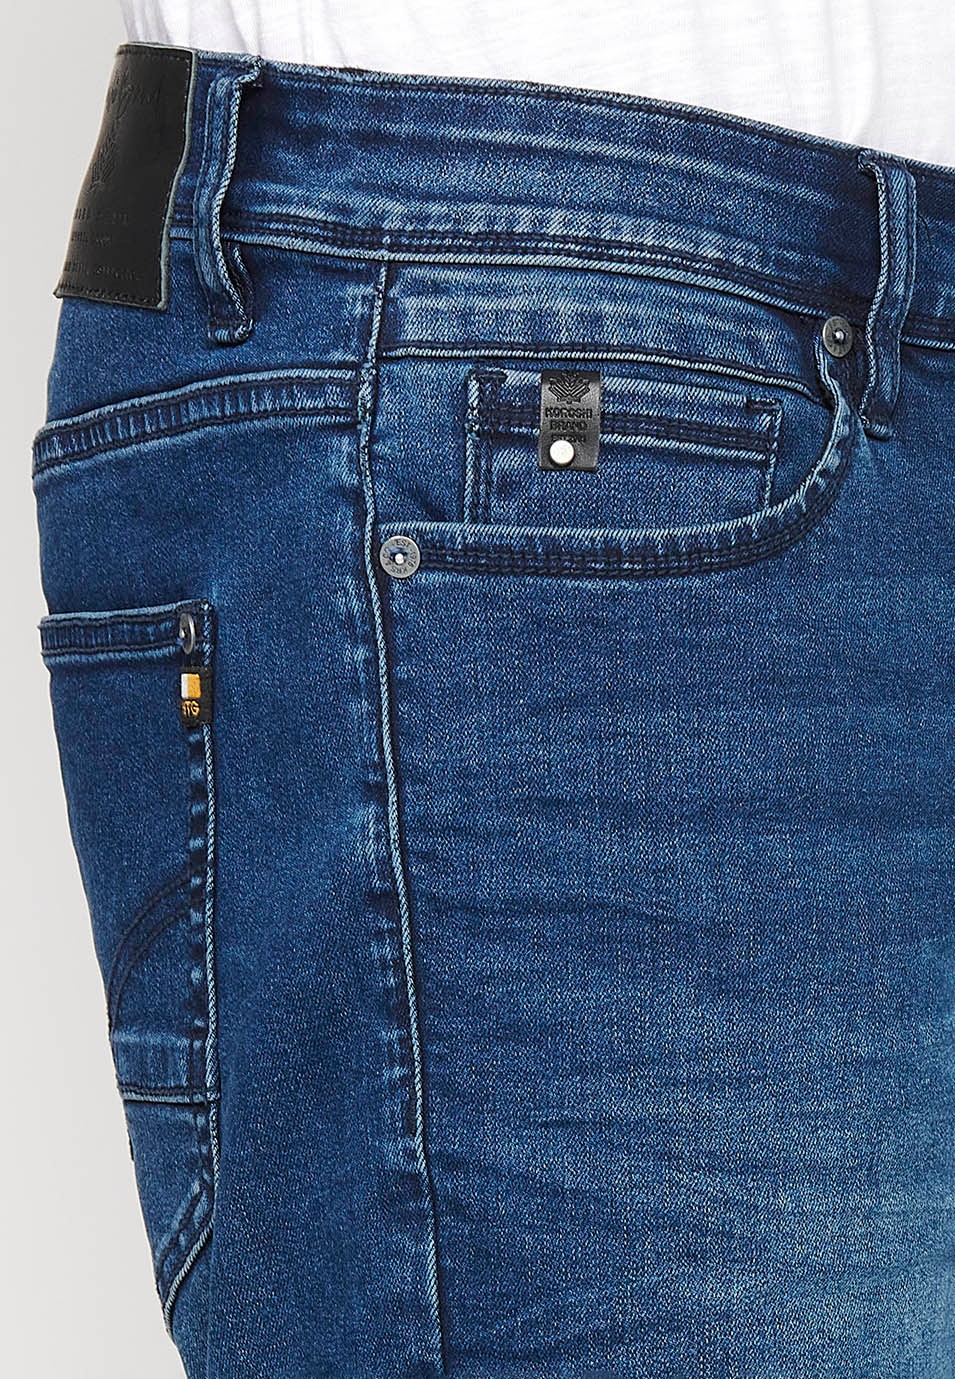 Denim shorts with front zipper and button closure and five pockets, one blue color pocket for Men